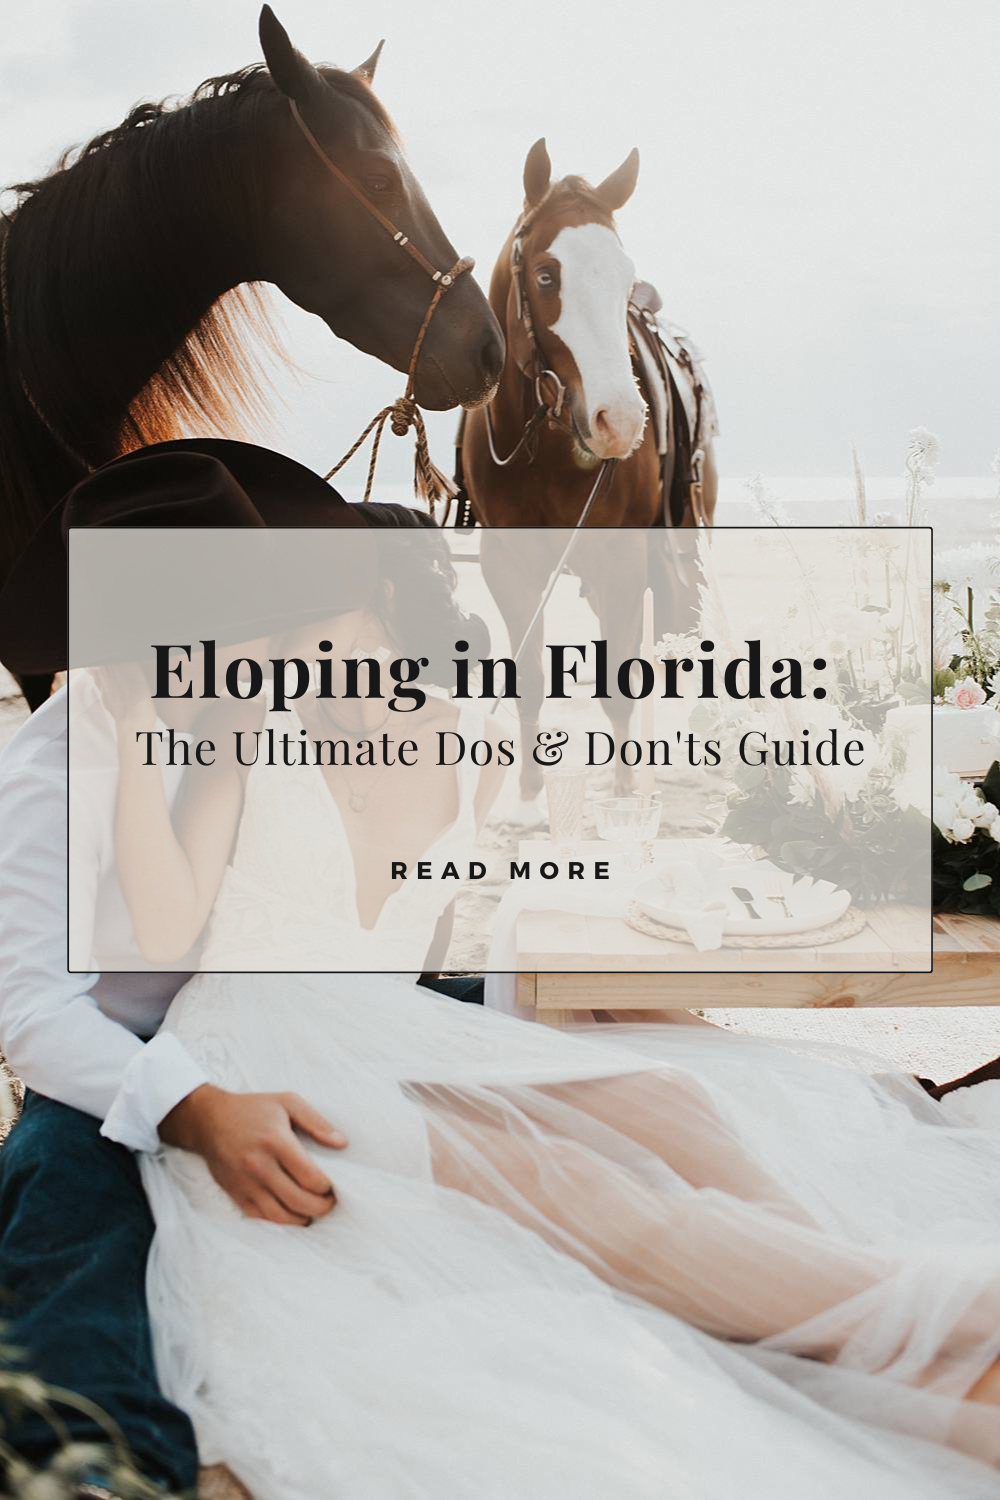 Eloping in Florida: The Ultimate Dos and Don'ts Guide